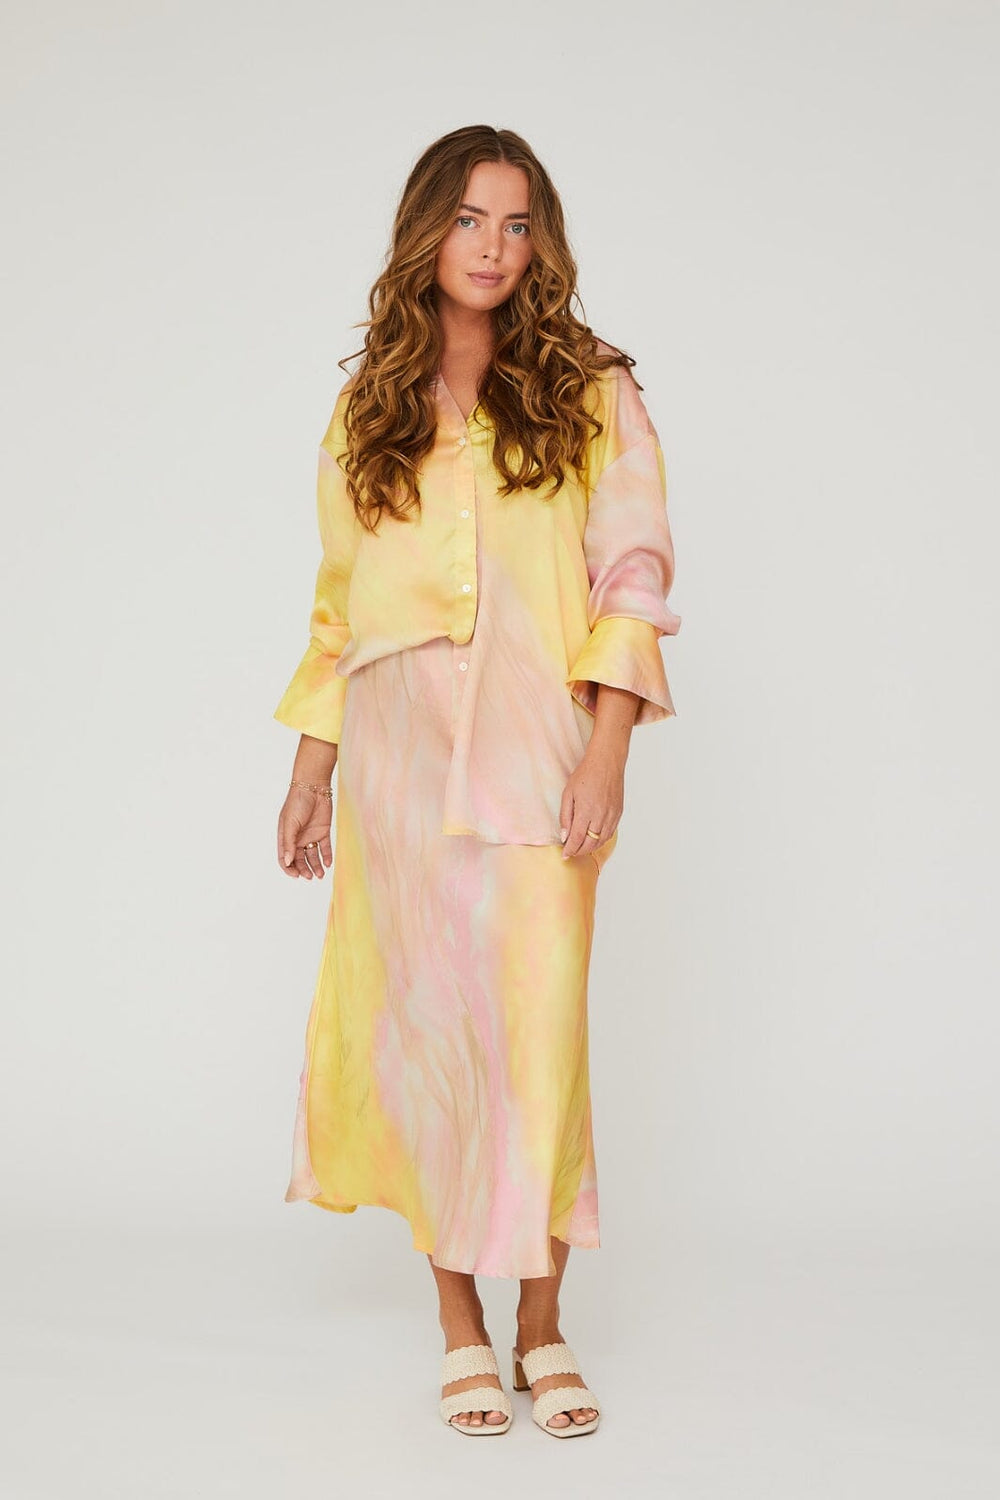 A-View - Carry Skirt - 302 Yellow/Rose Nederdele 